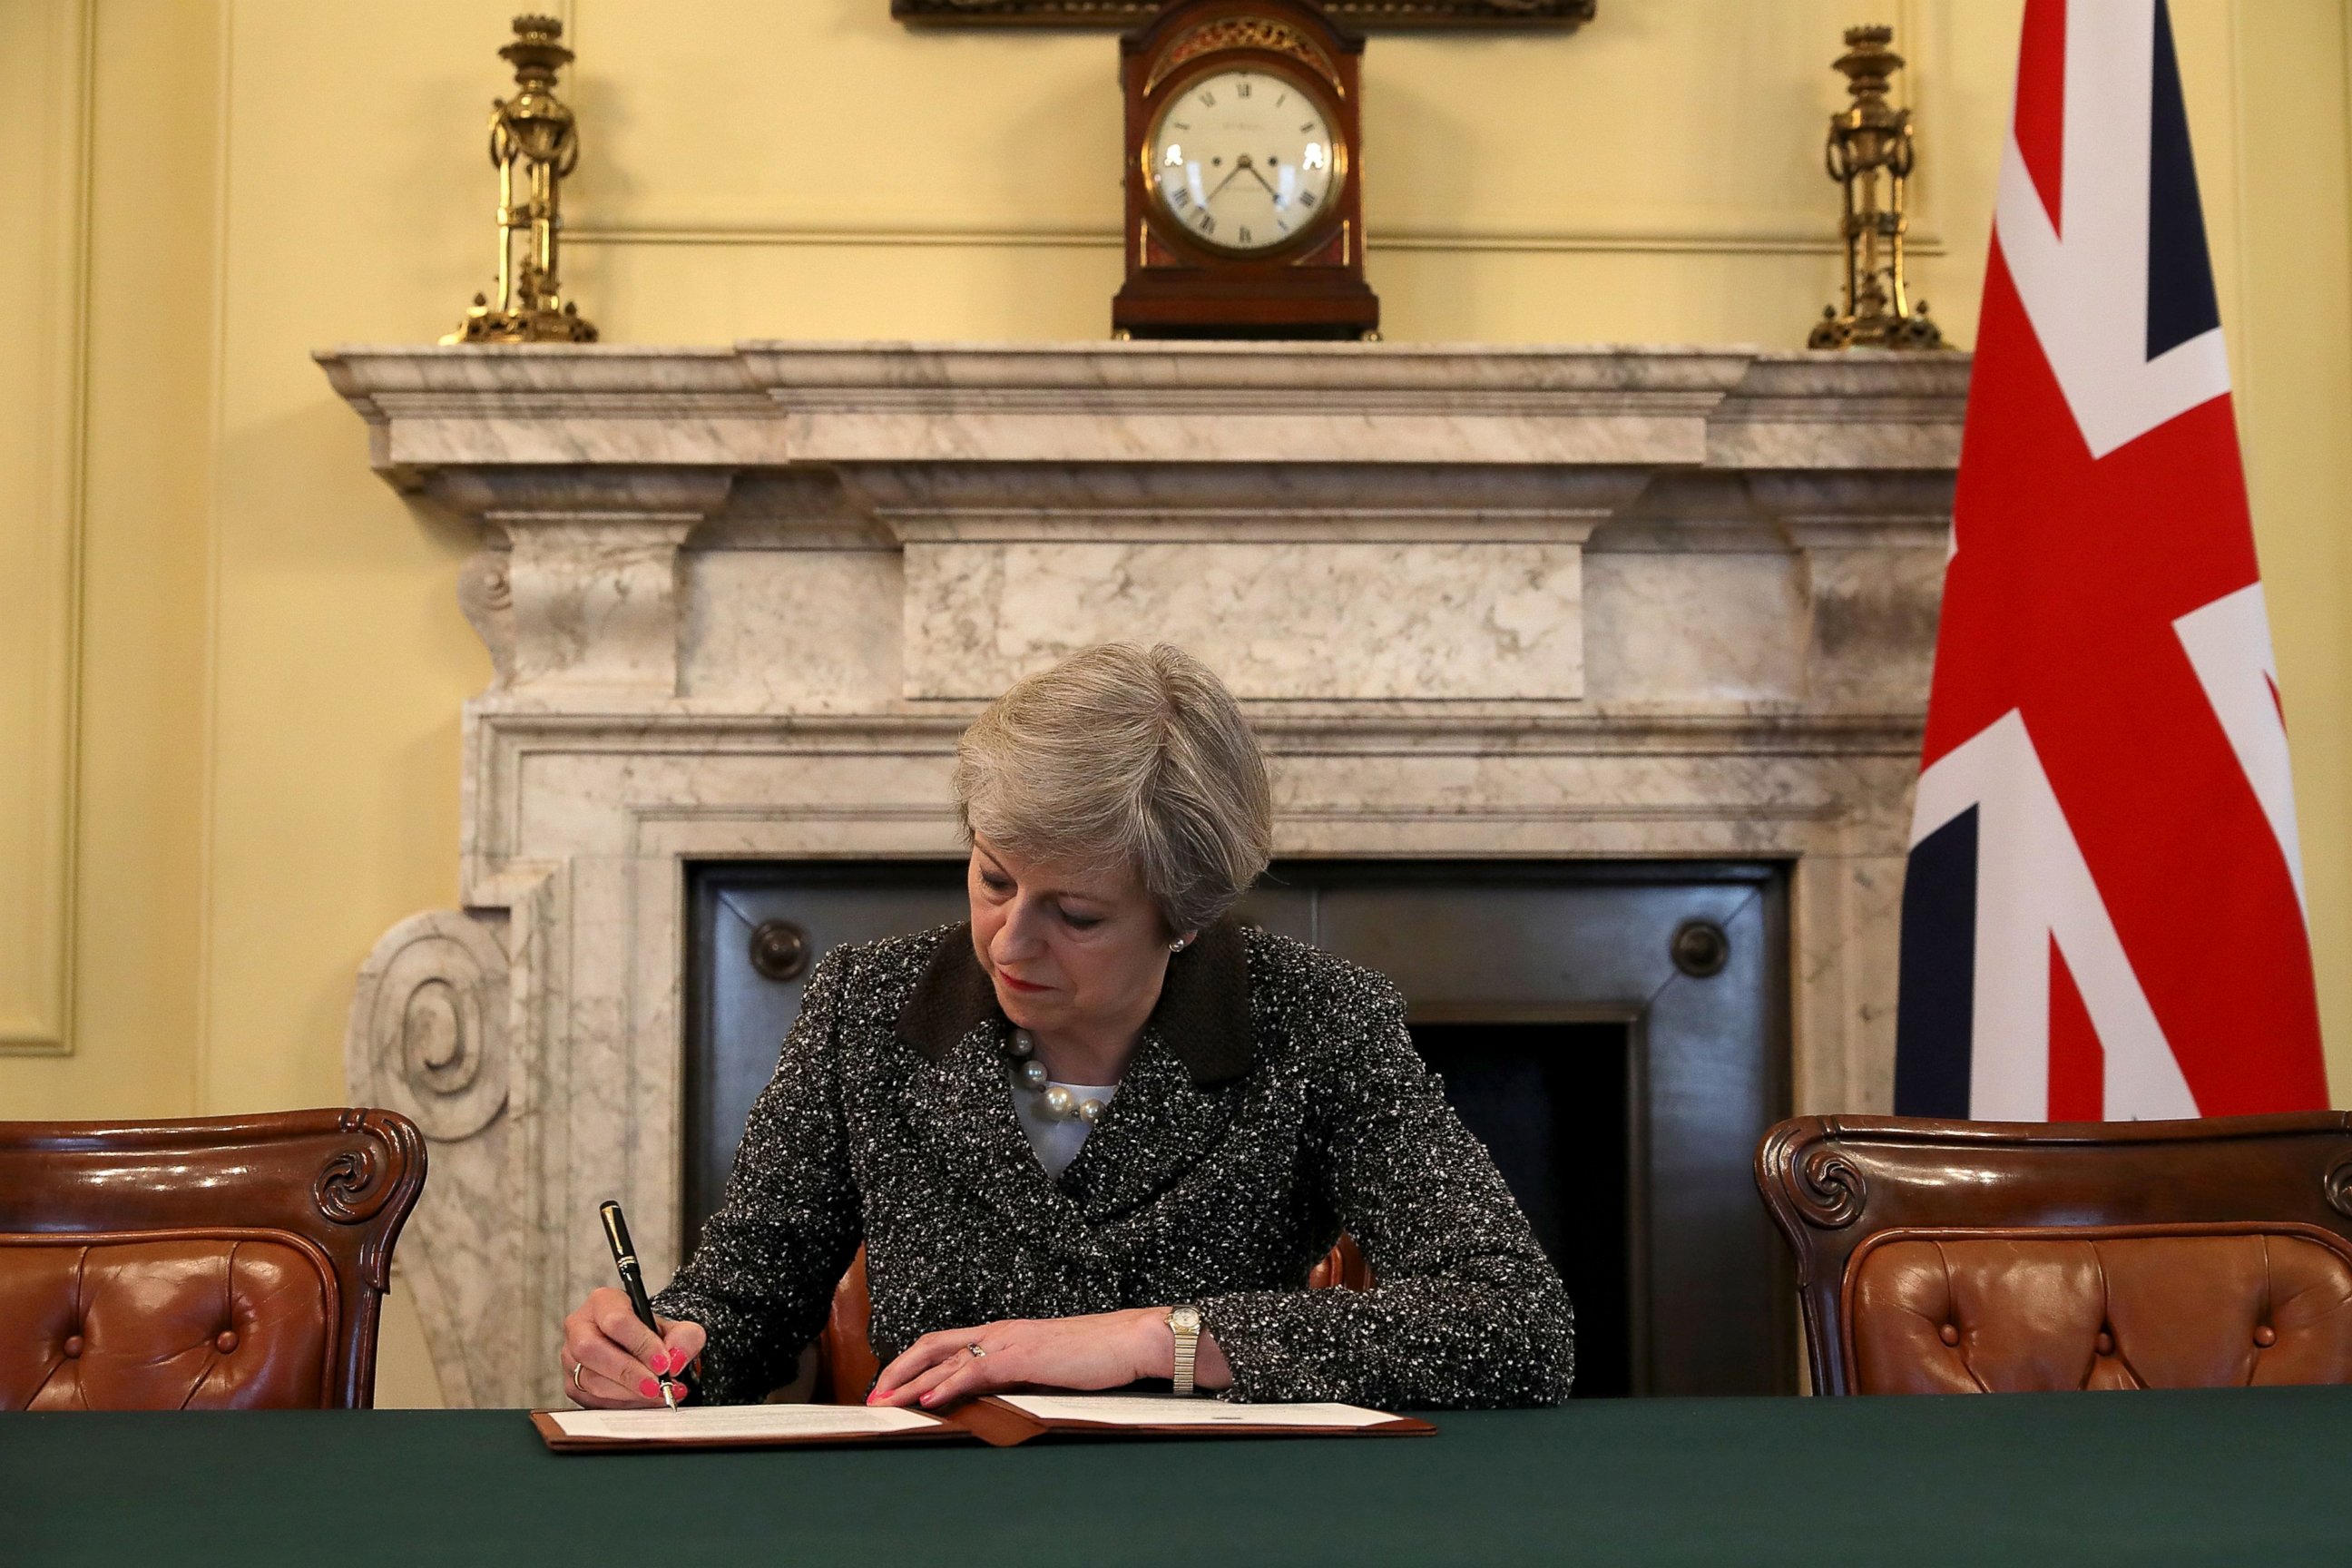 PHOTO: British Prime Minister Theresa May signs the official letter to European Council President Donald Tusk invoking Article 50 and the United Kingdom's intention to leave the EU, March 28, 2017 in London.